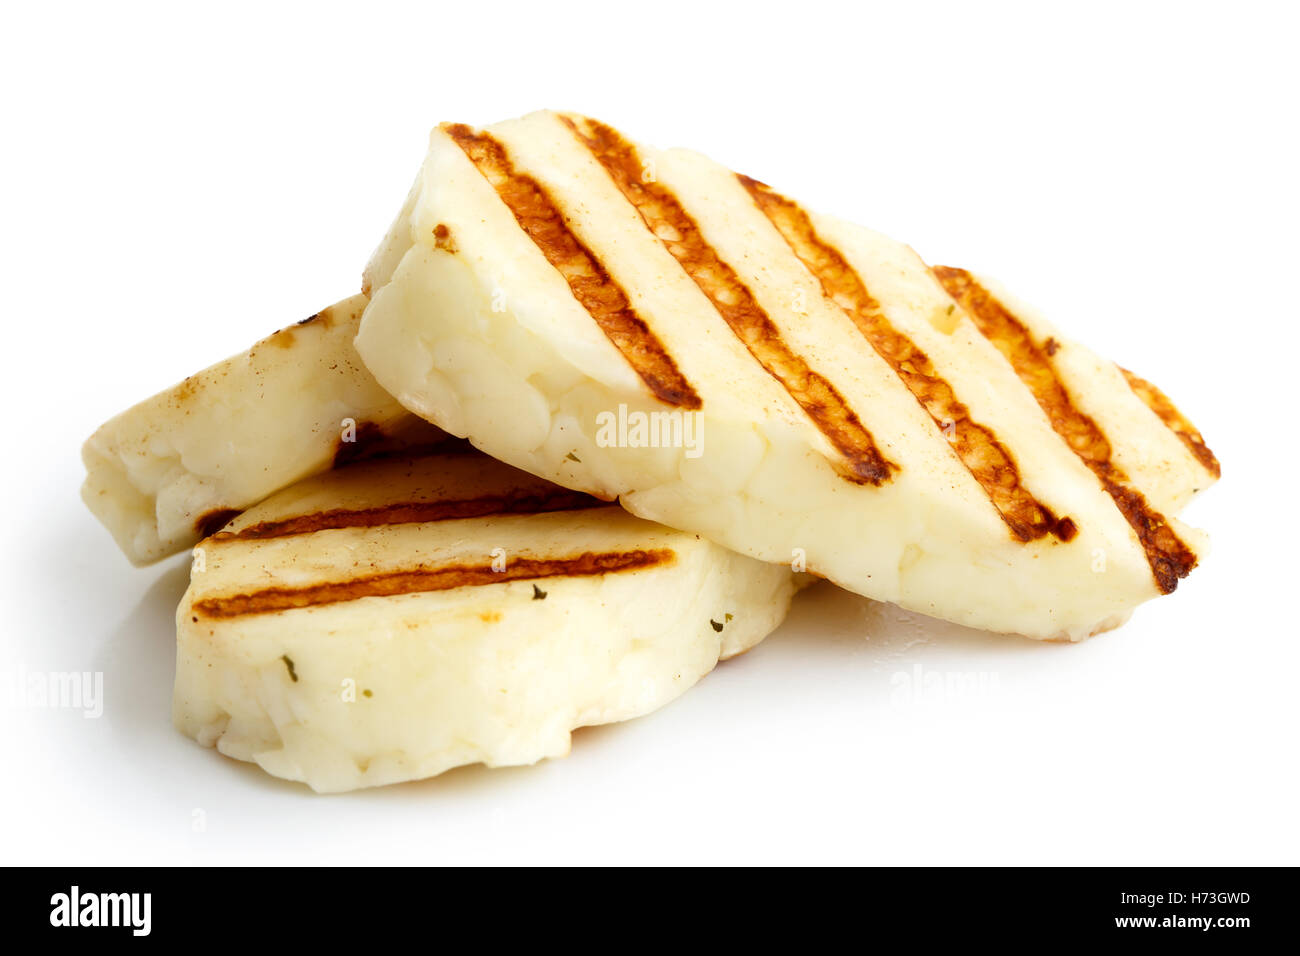 Three grilled slices of halloumi cheese isolated on white in perspective. With grill marks. Stock Photo